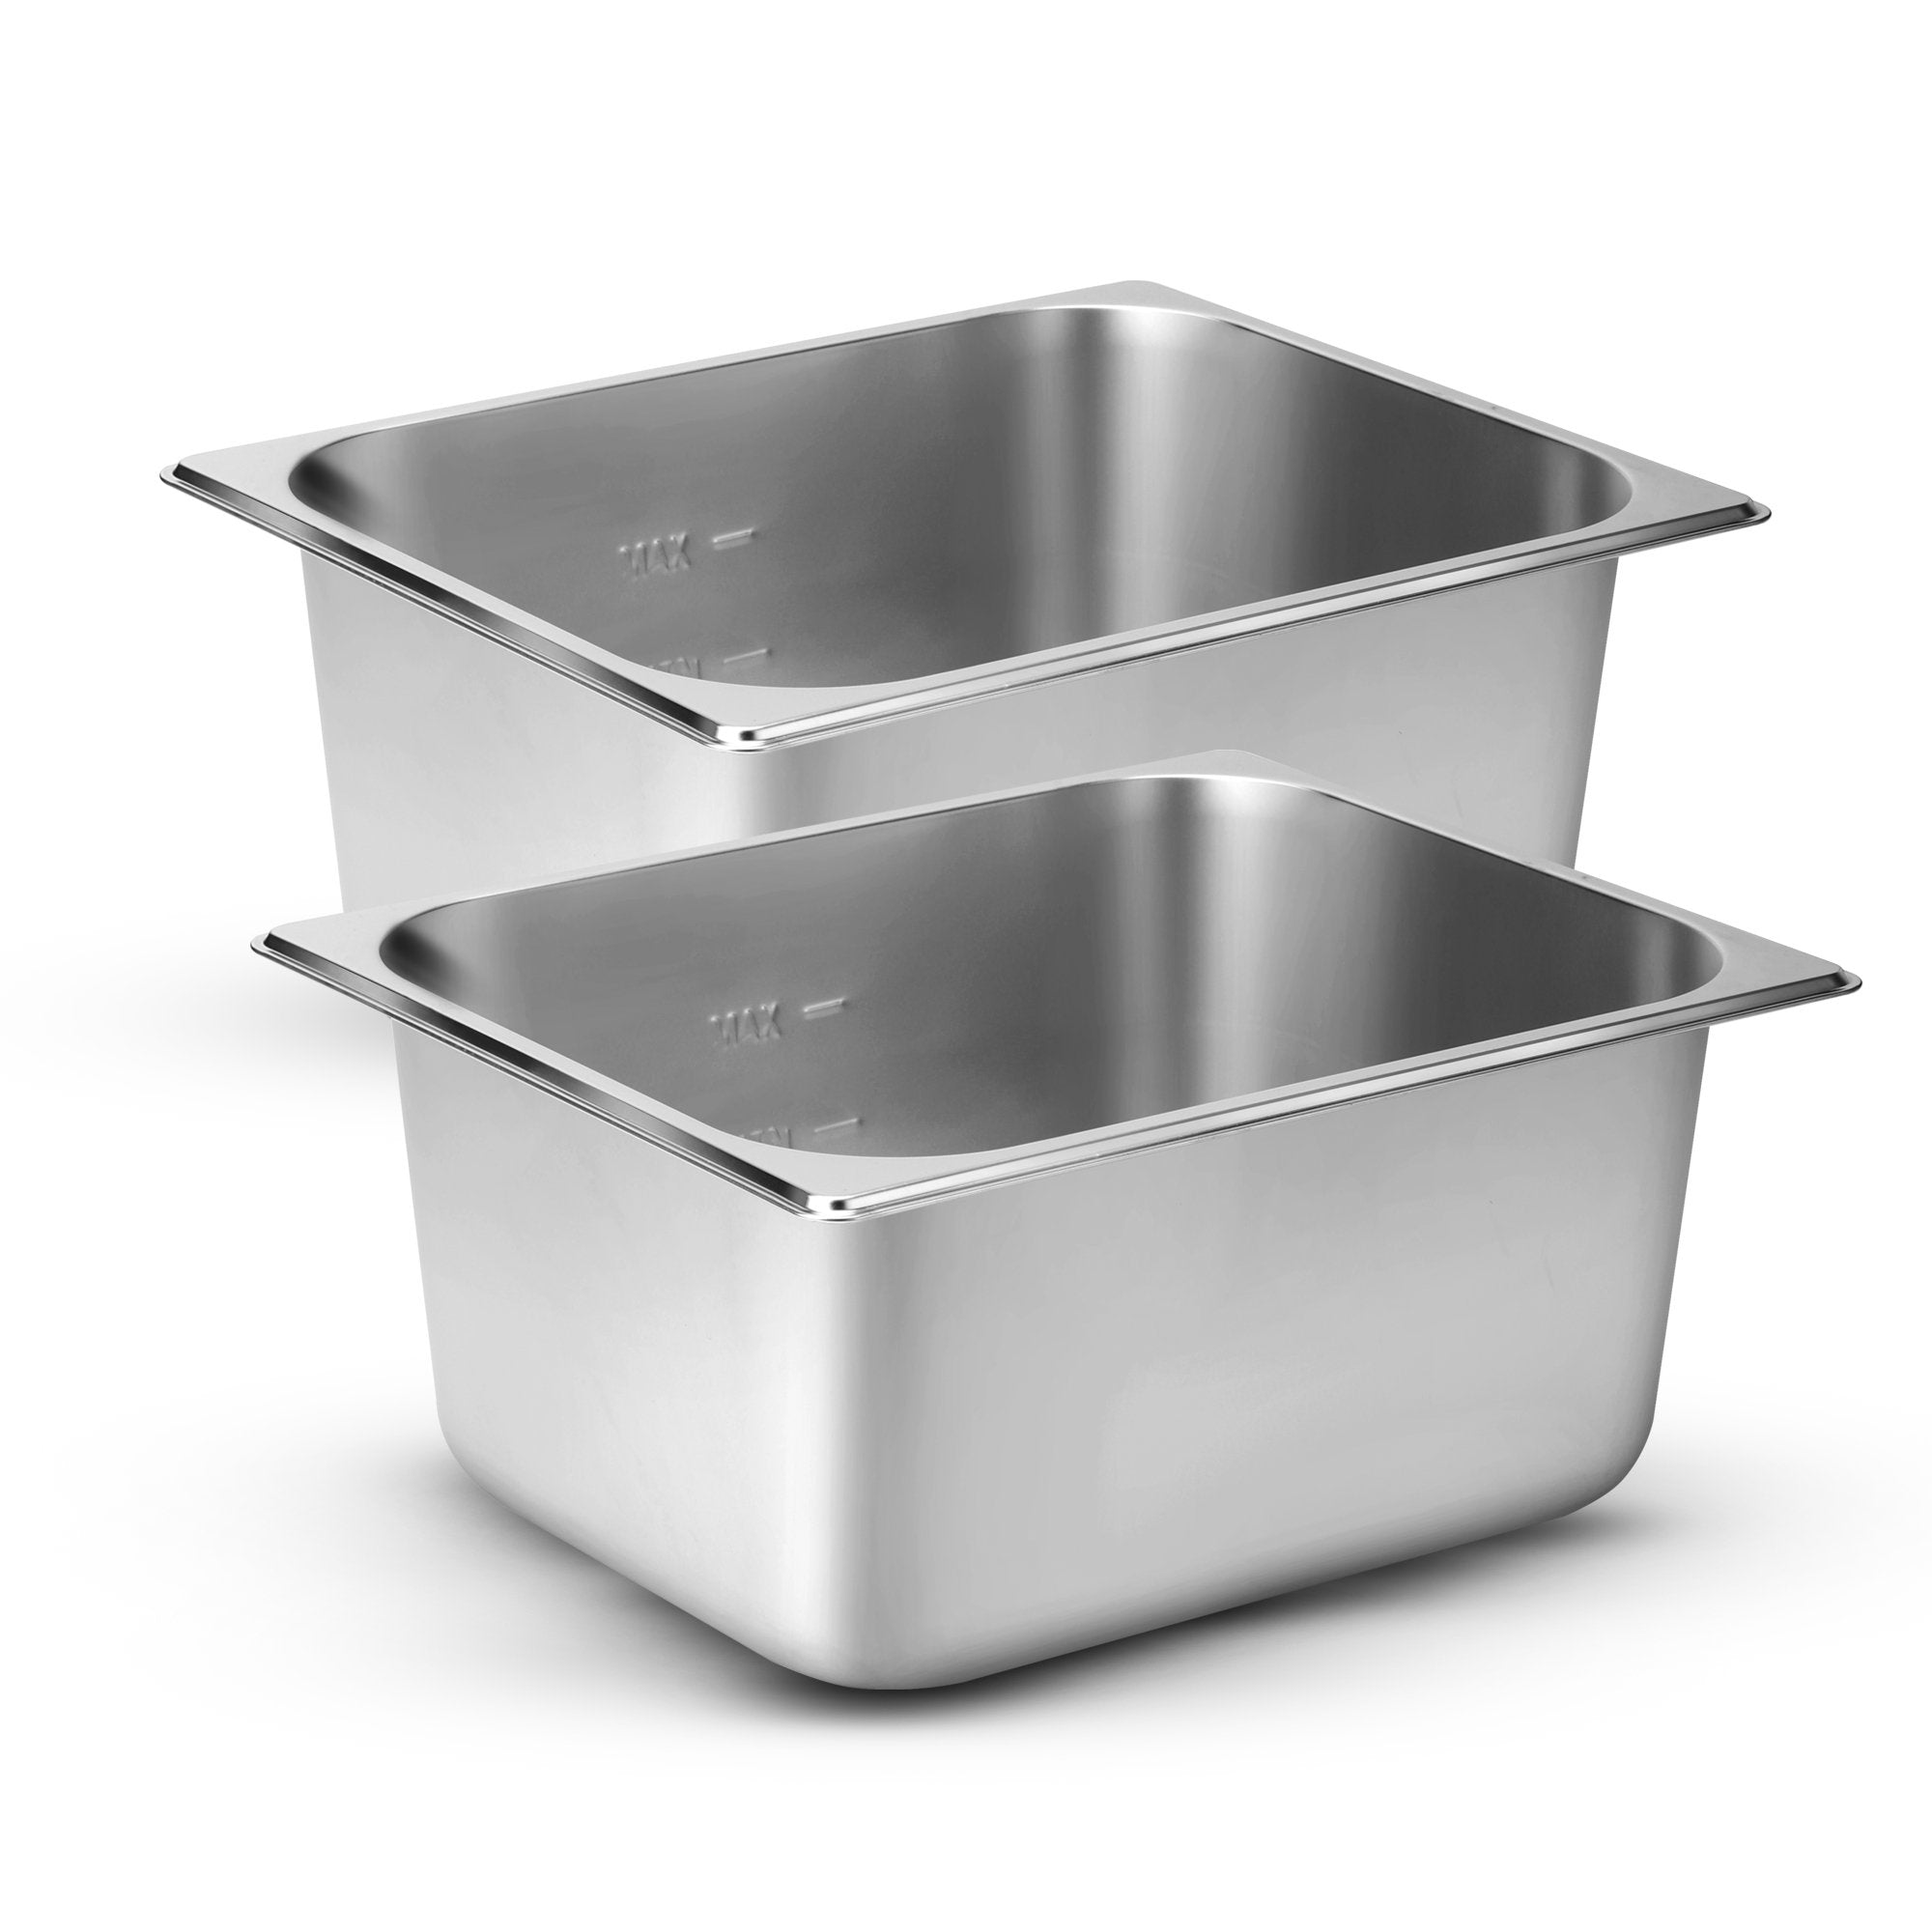 bioexcel-full-size-steam-table-pan-thick-stainless-steel-hotel-pans